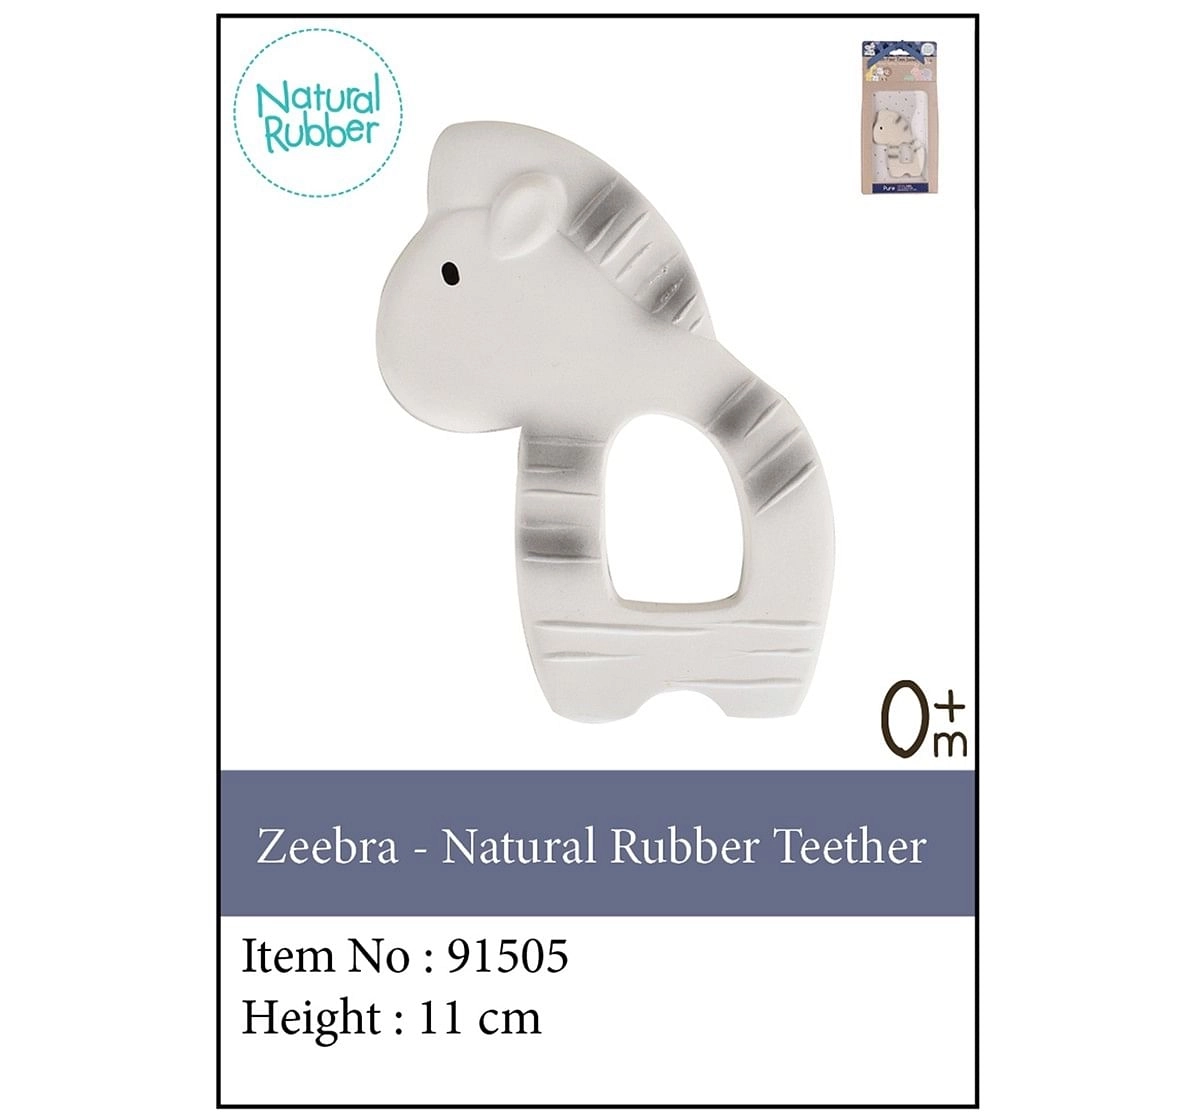 Zebra Natural Rubber Teether for Kids age 0M+